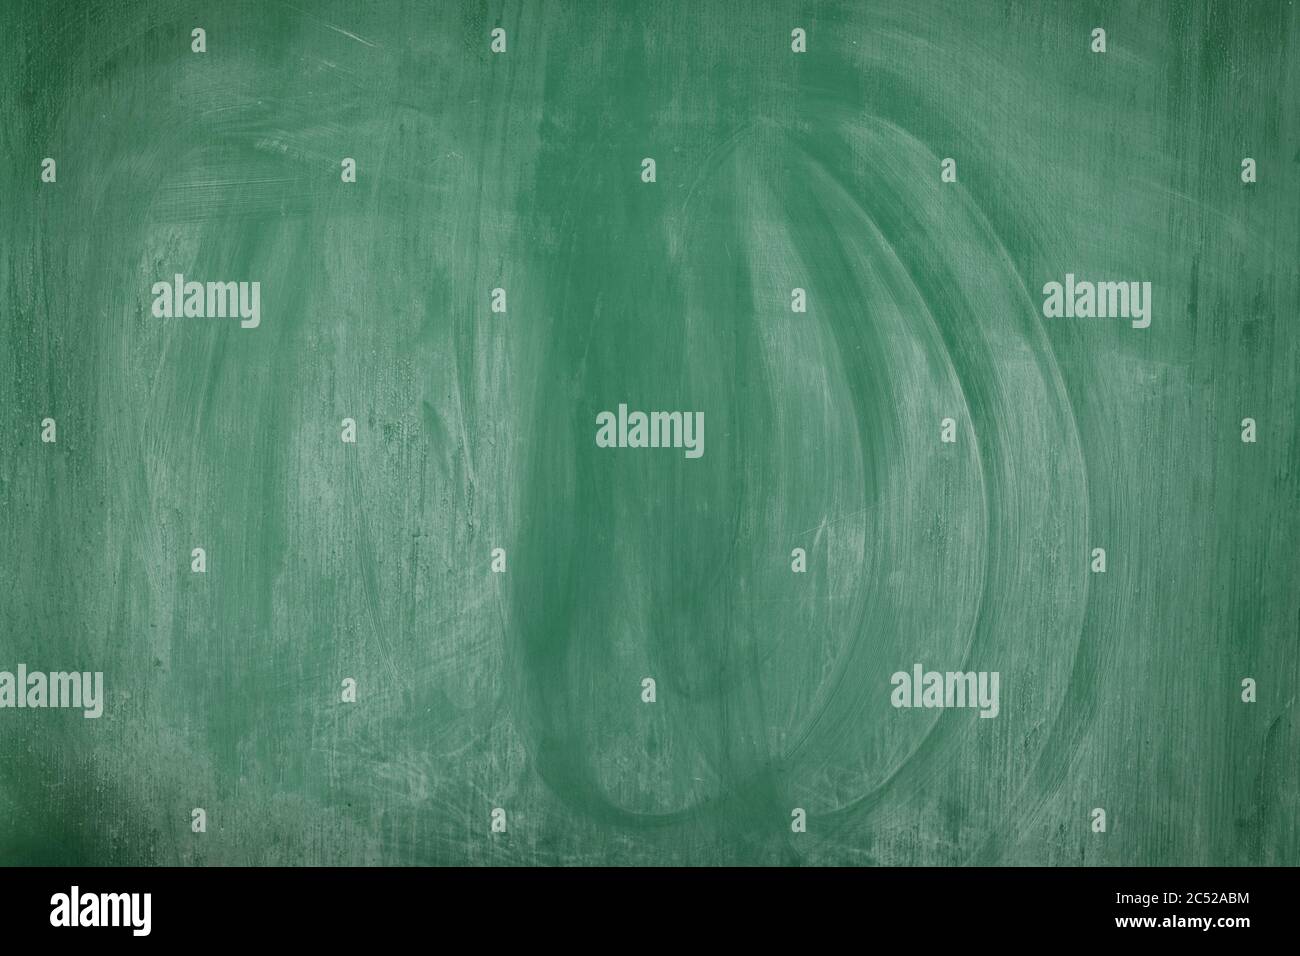 Green Blank blackboard with board eraser texture for back to school or menu frame background Stock Photo